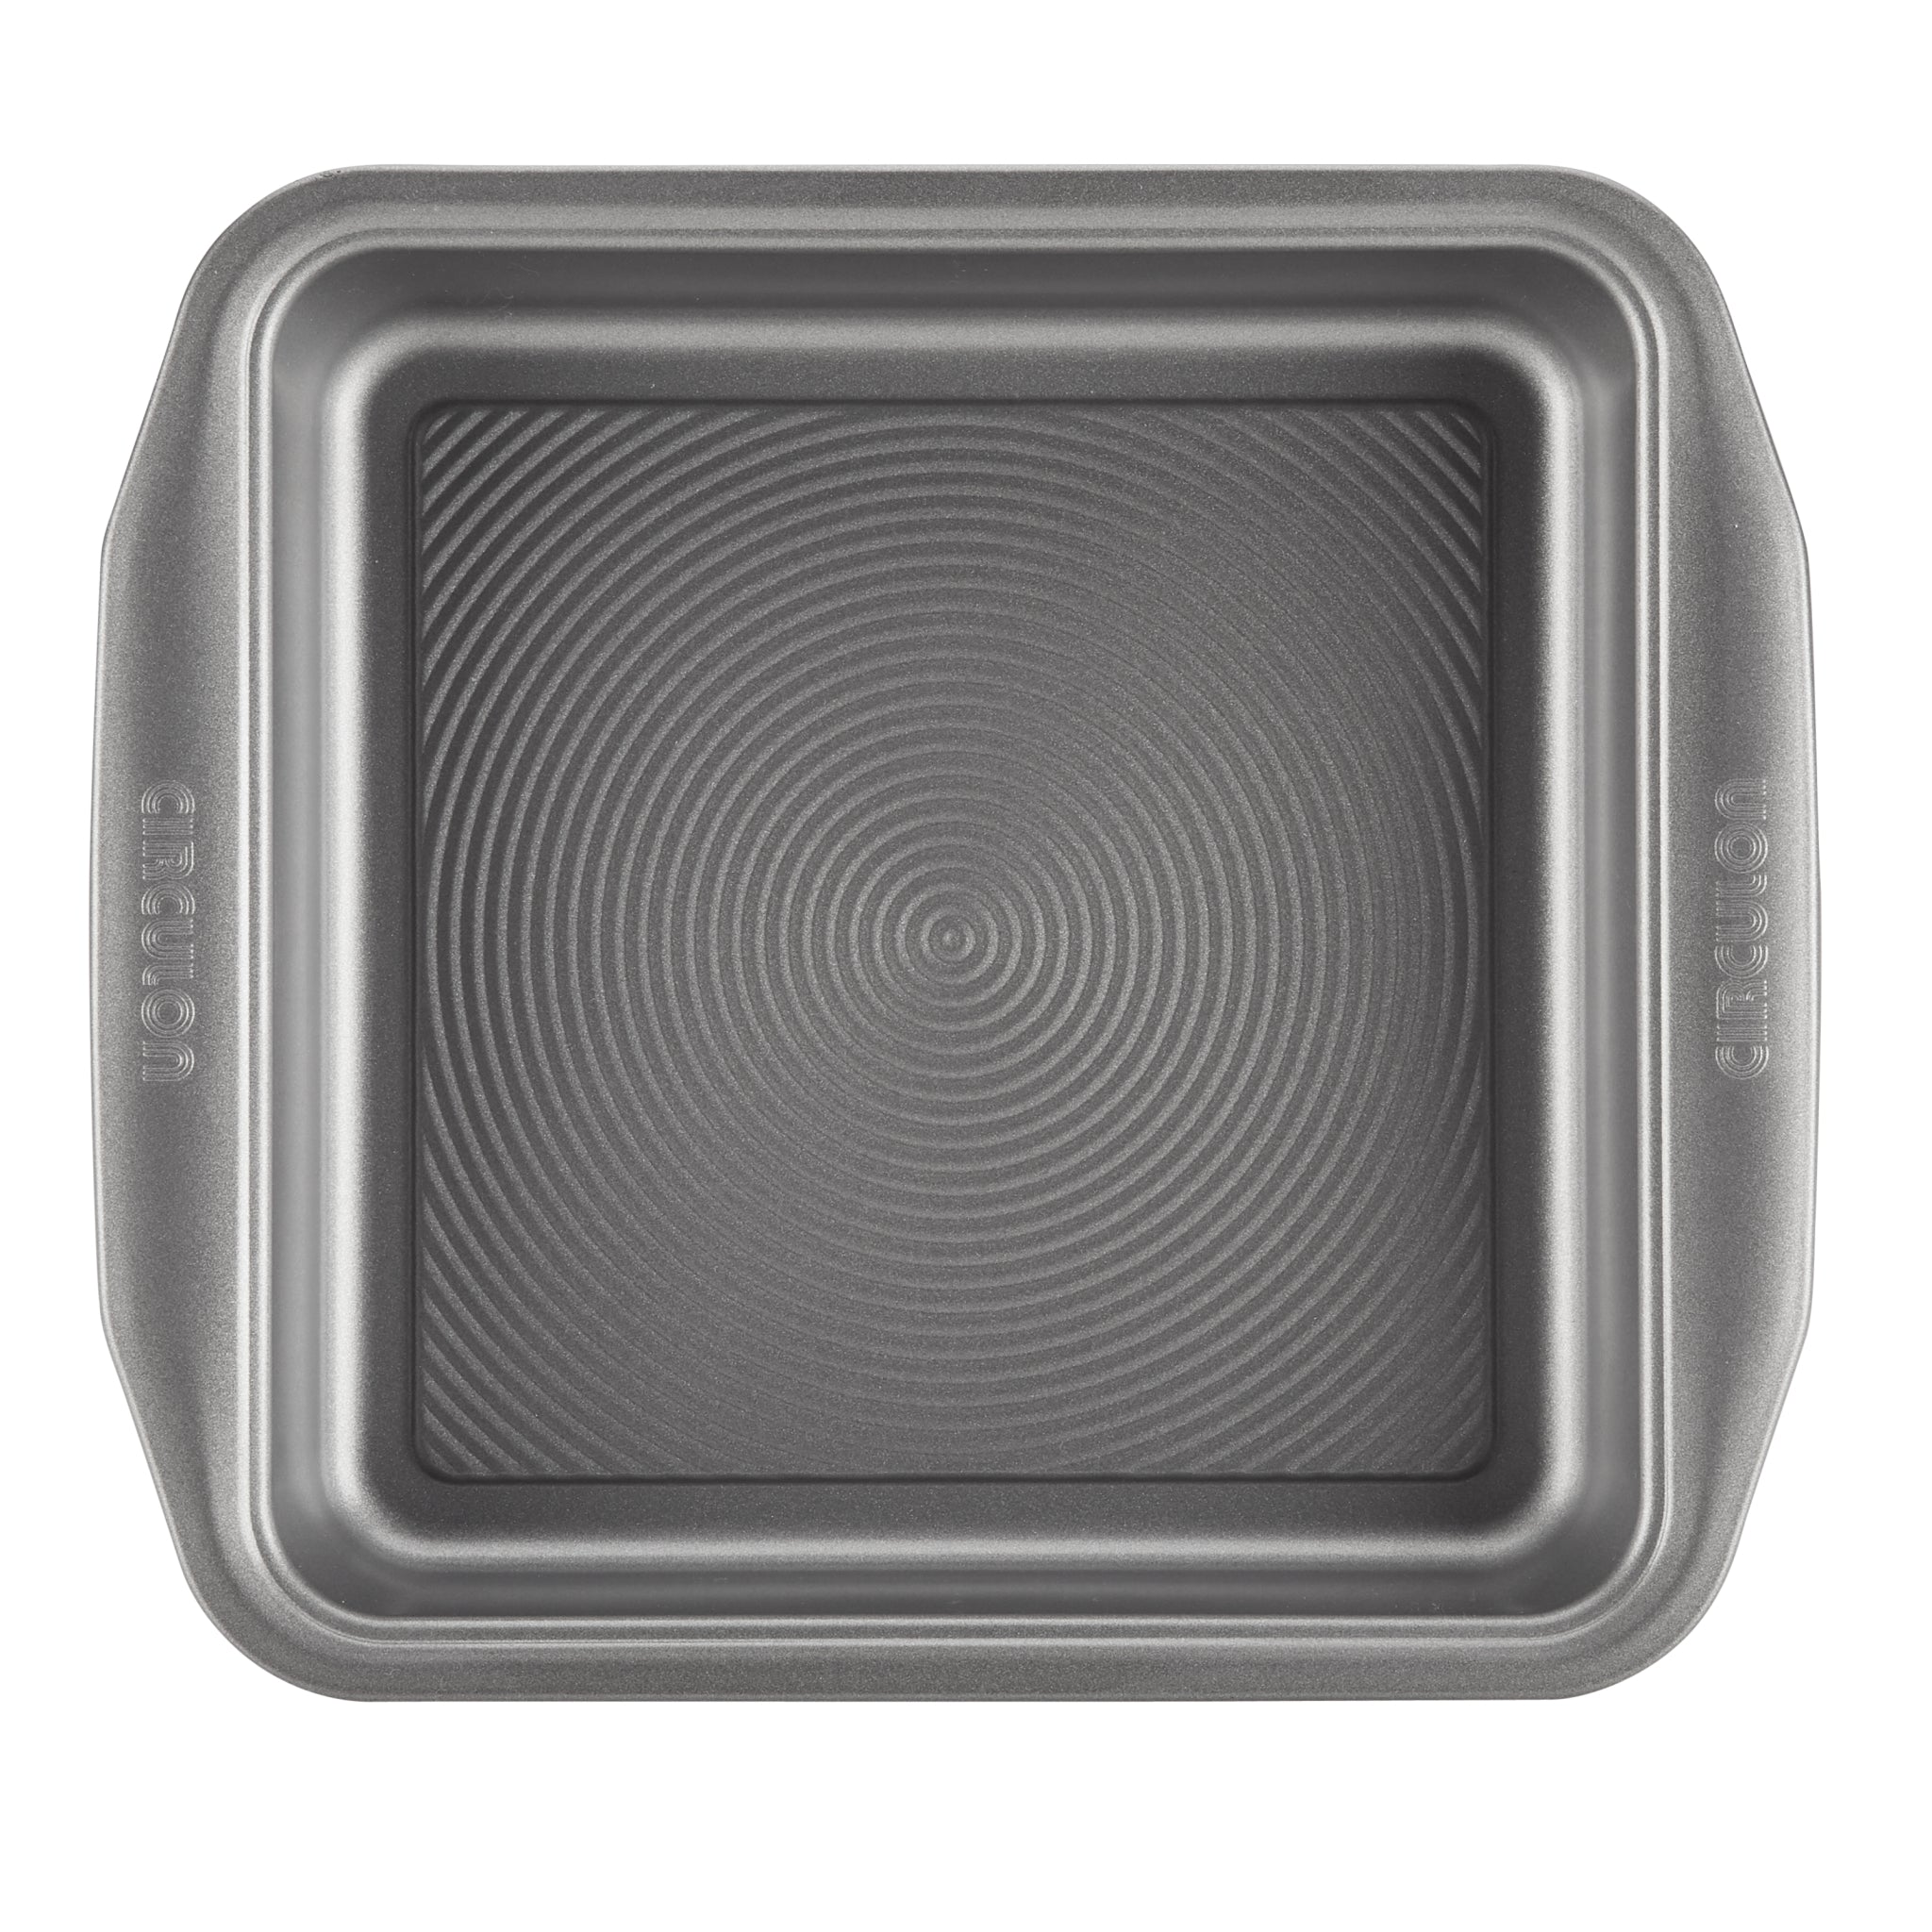 Only 41.97 usd for 6-Piece Round Nesting Bakeware Set Online at